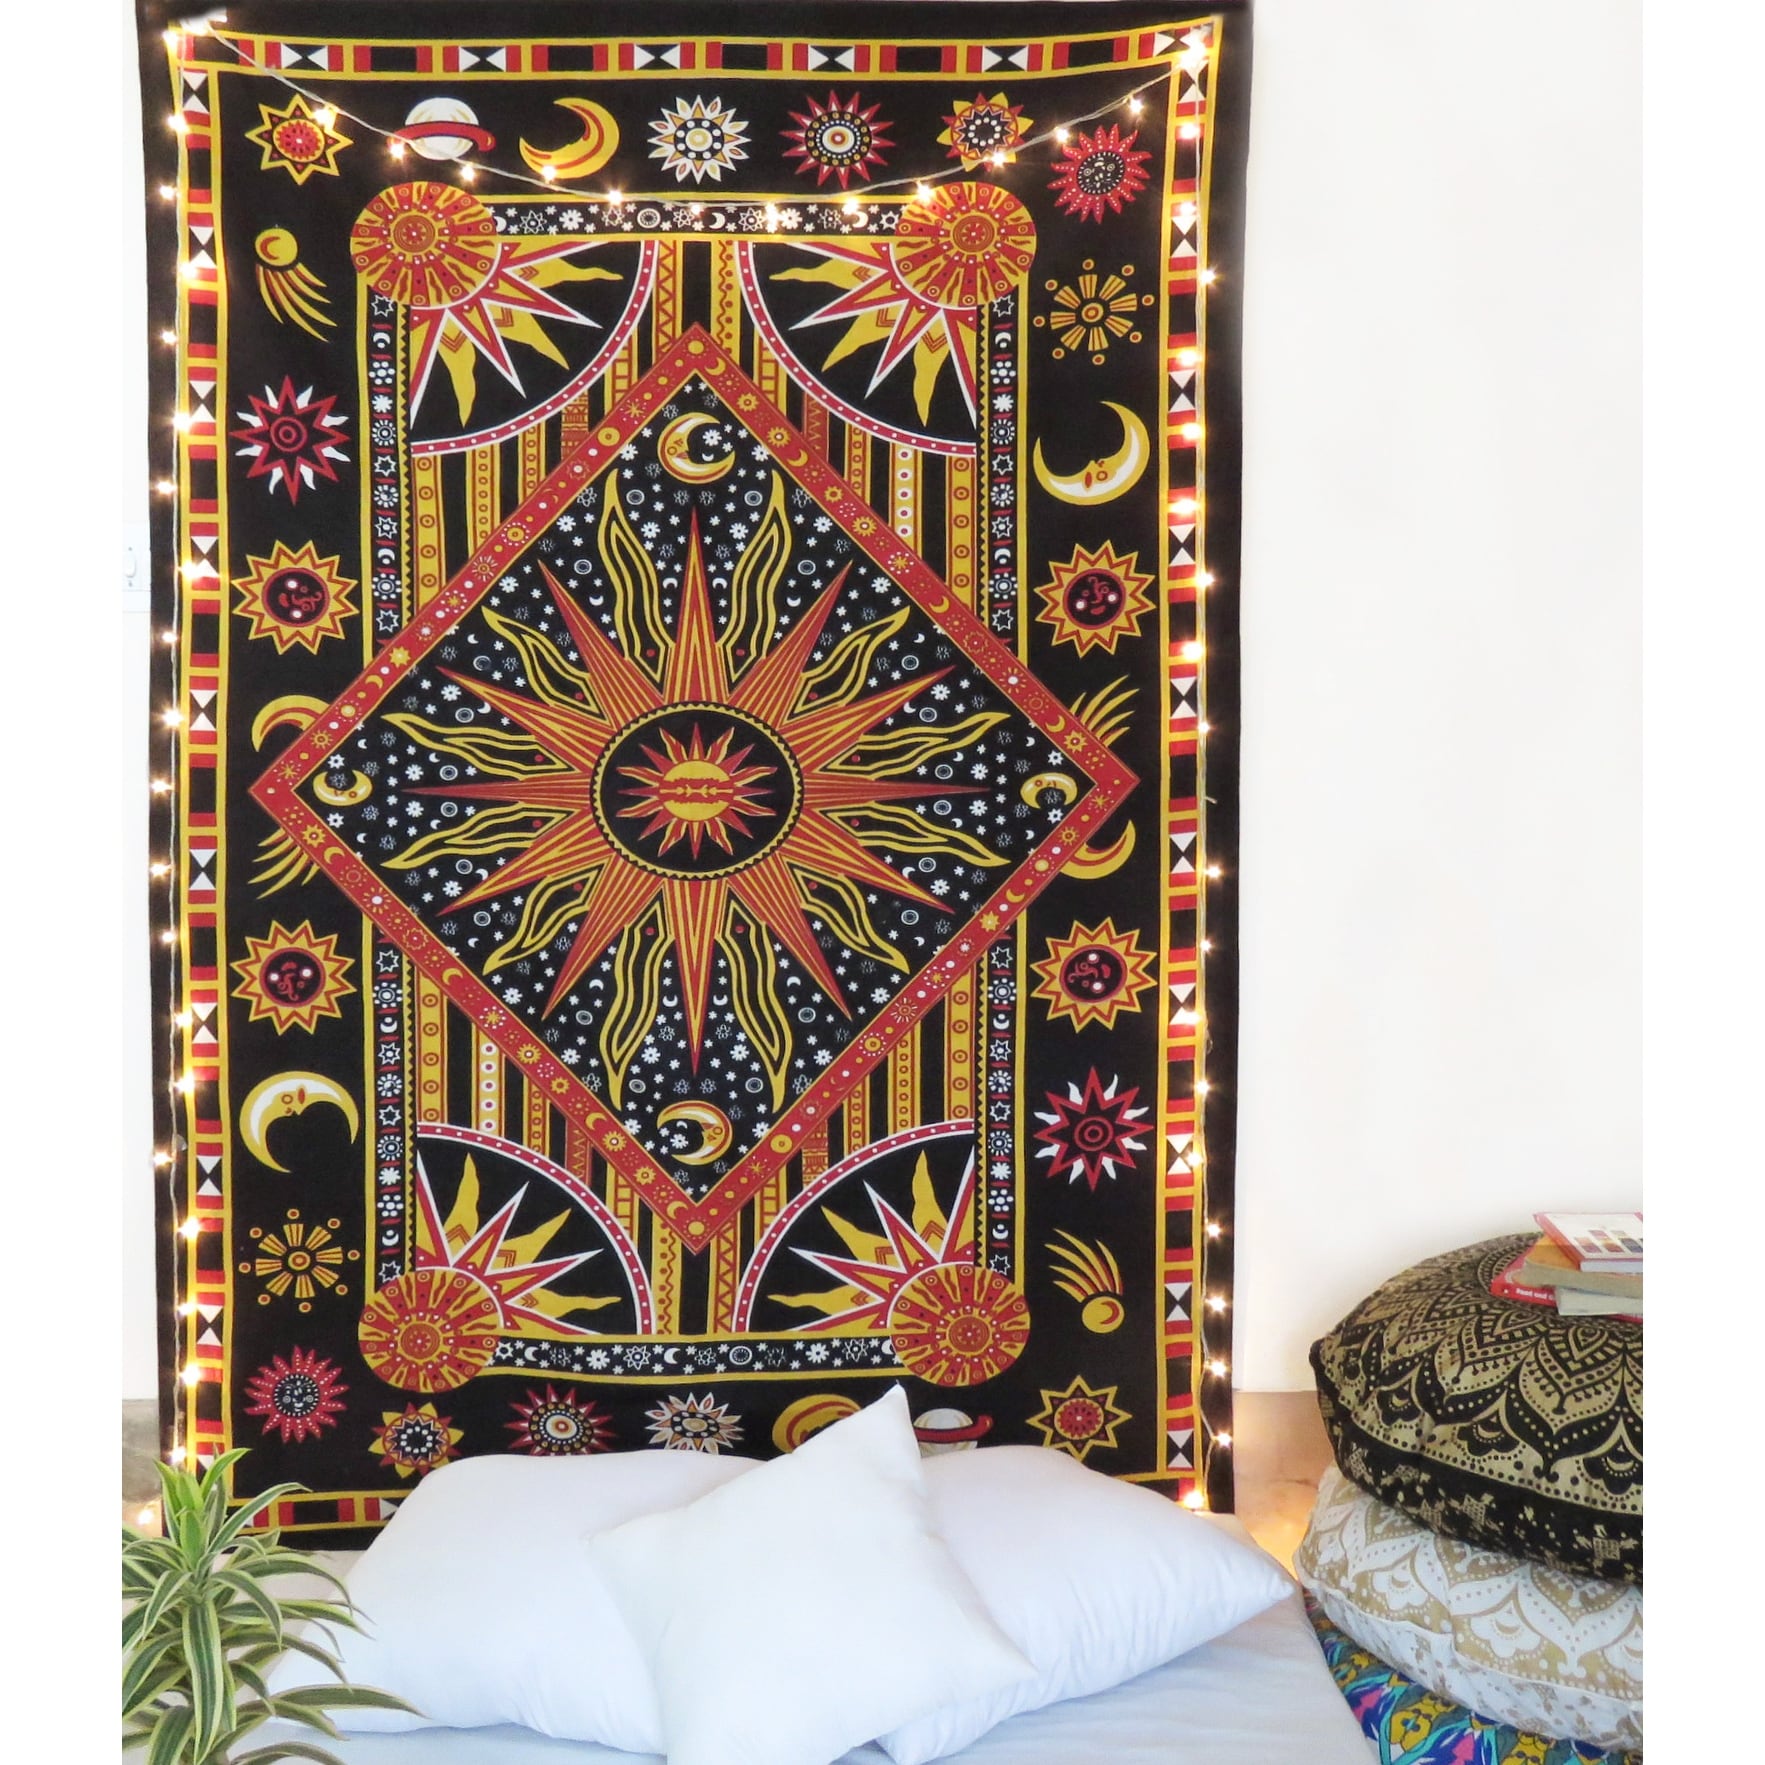 Tapestry Poster Indian Sun Moon Face Wall Hanging Textile Table Cloth Hippie Art 